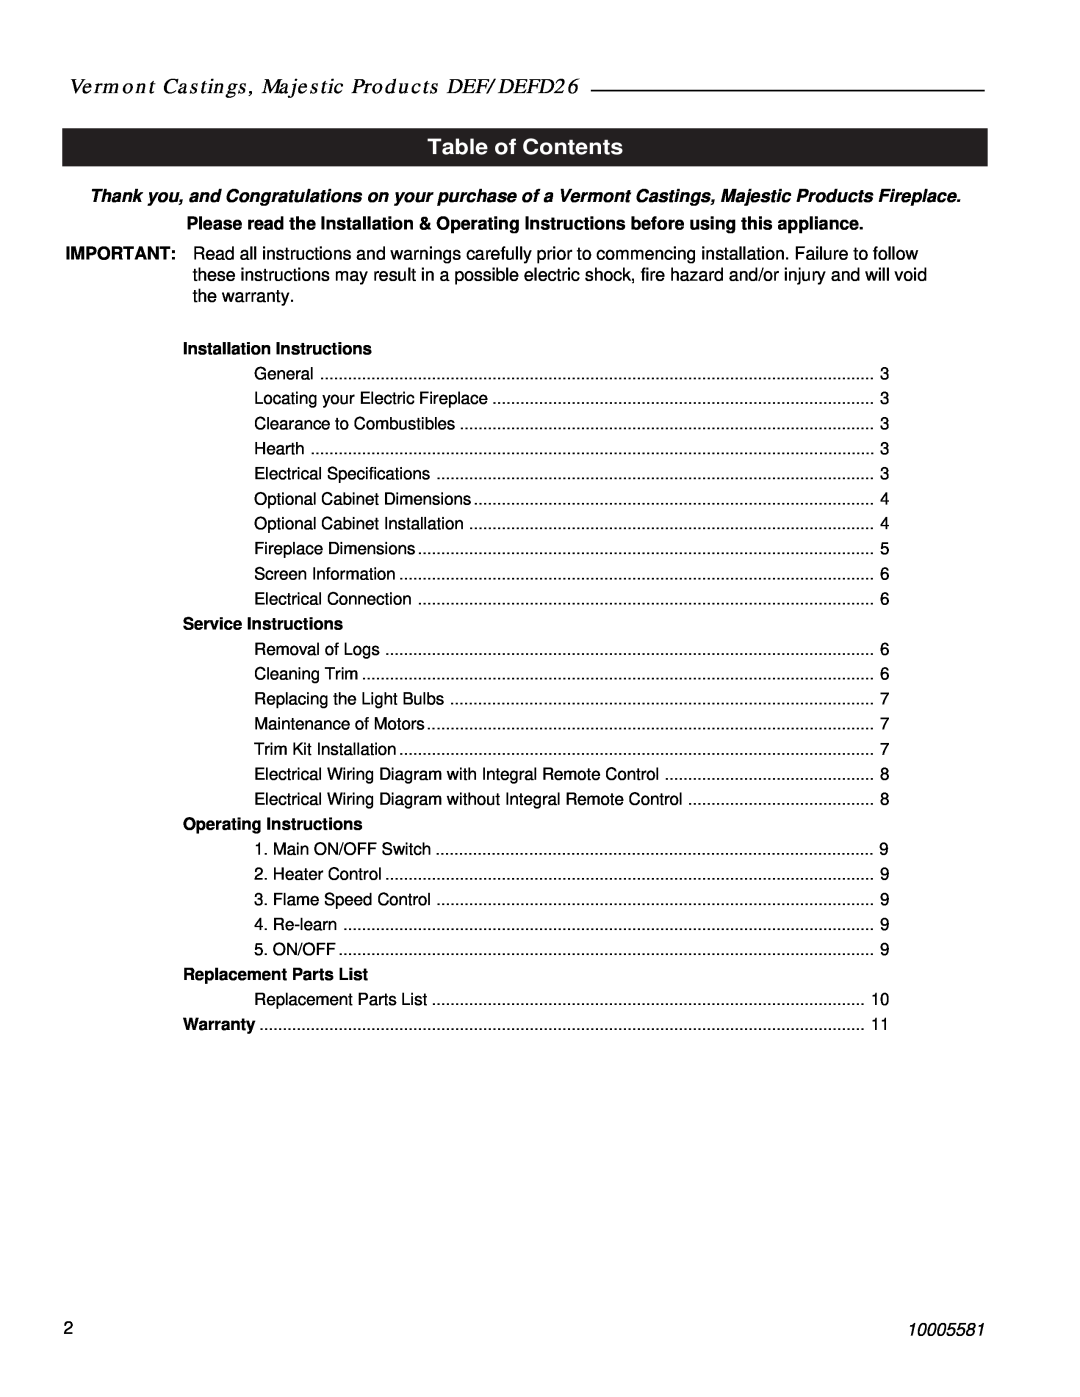 Vermont Casting manual Vermont Castings, Majestic Products DEF/DEFD26, Table of Contents, 10005581 